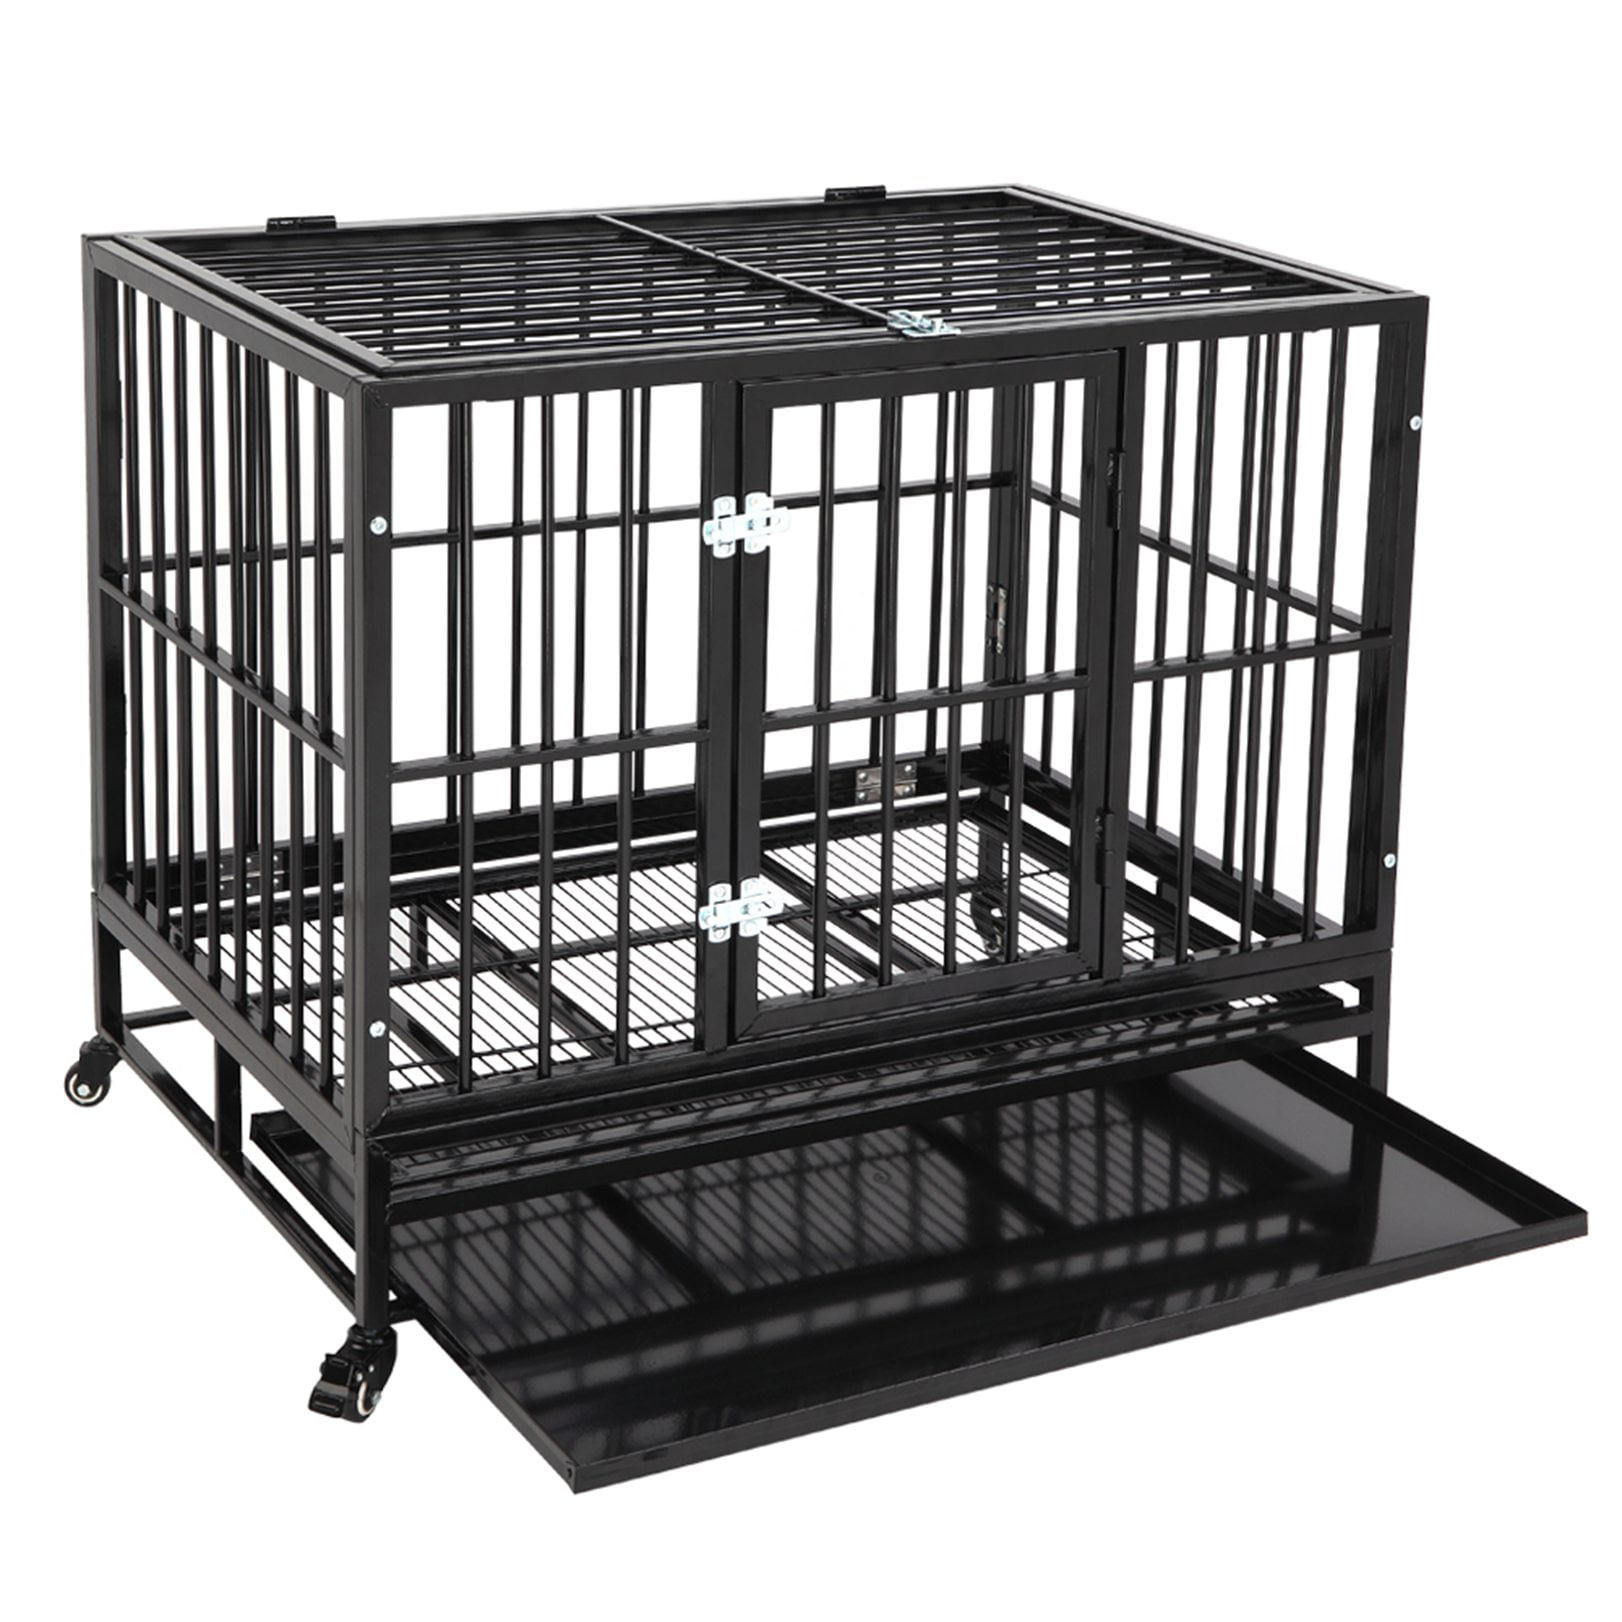 New 36"*24"*30" Heavy Duty Metal Dog Crate Pet Kennel Cage Playpen w/Tray Castor 